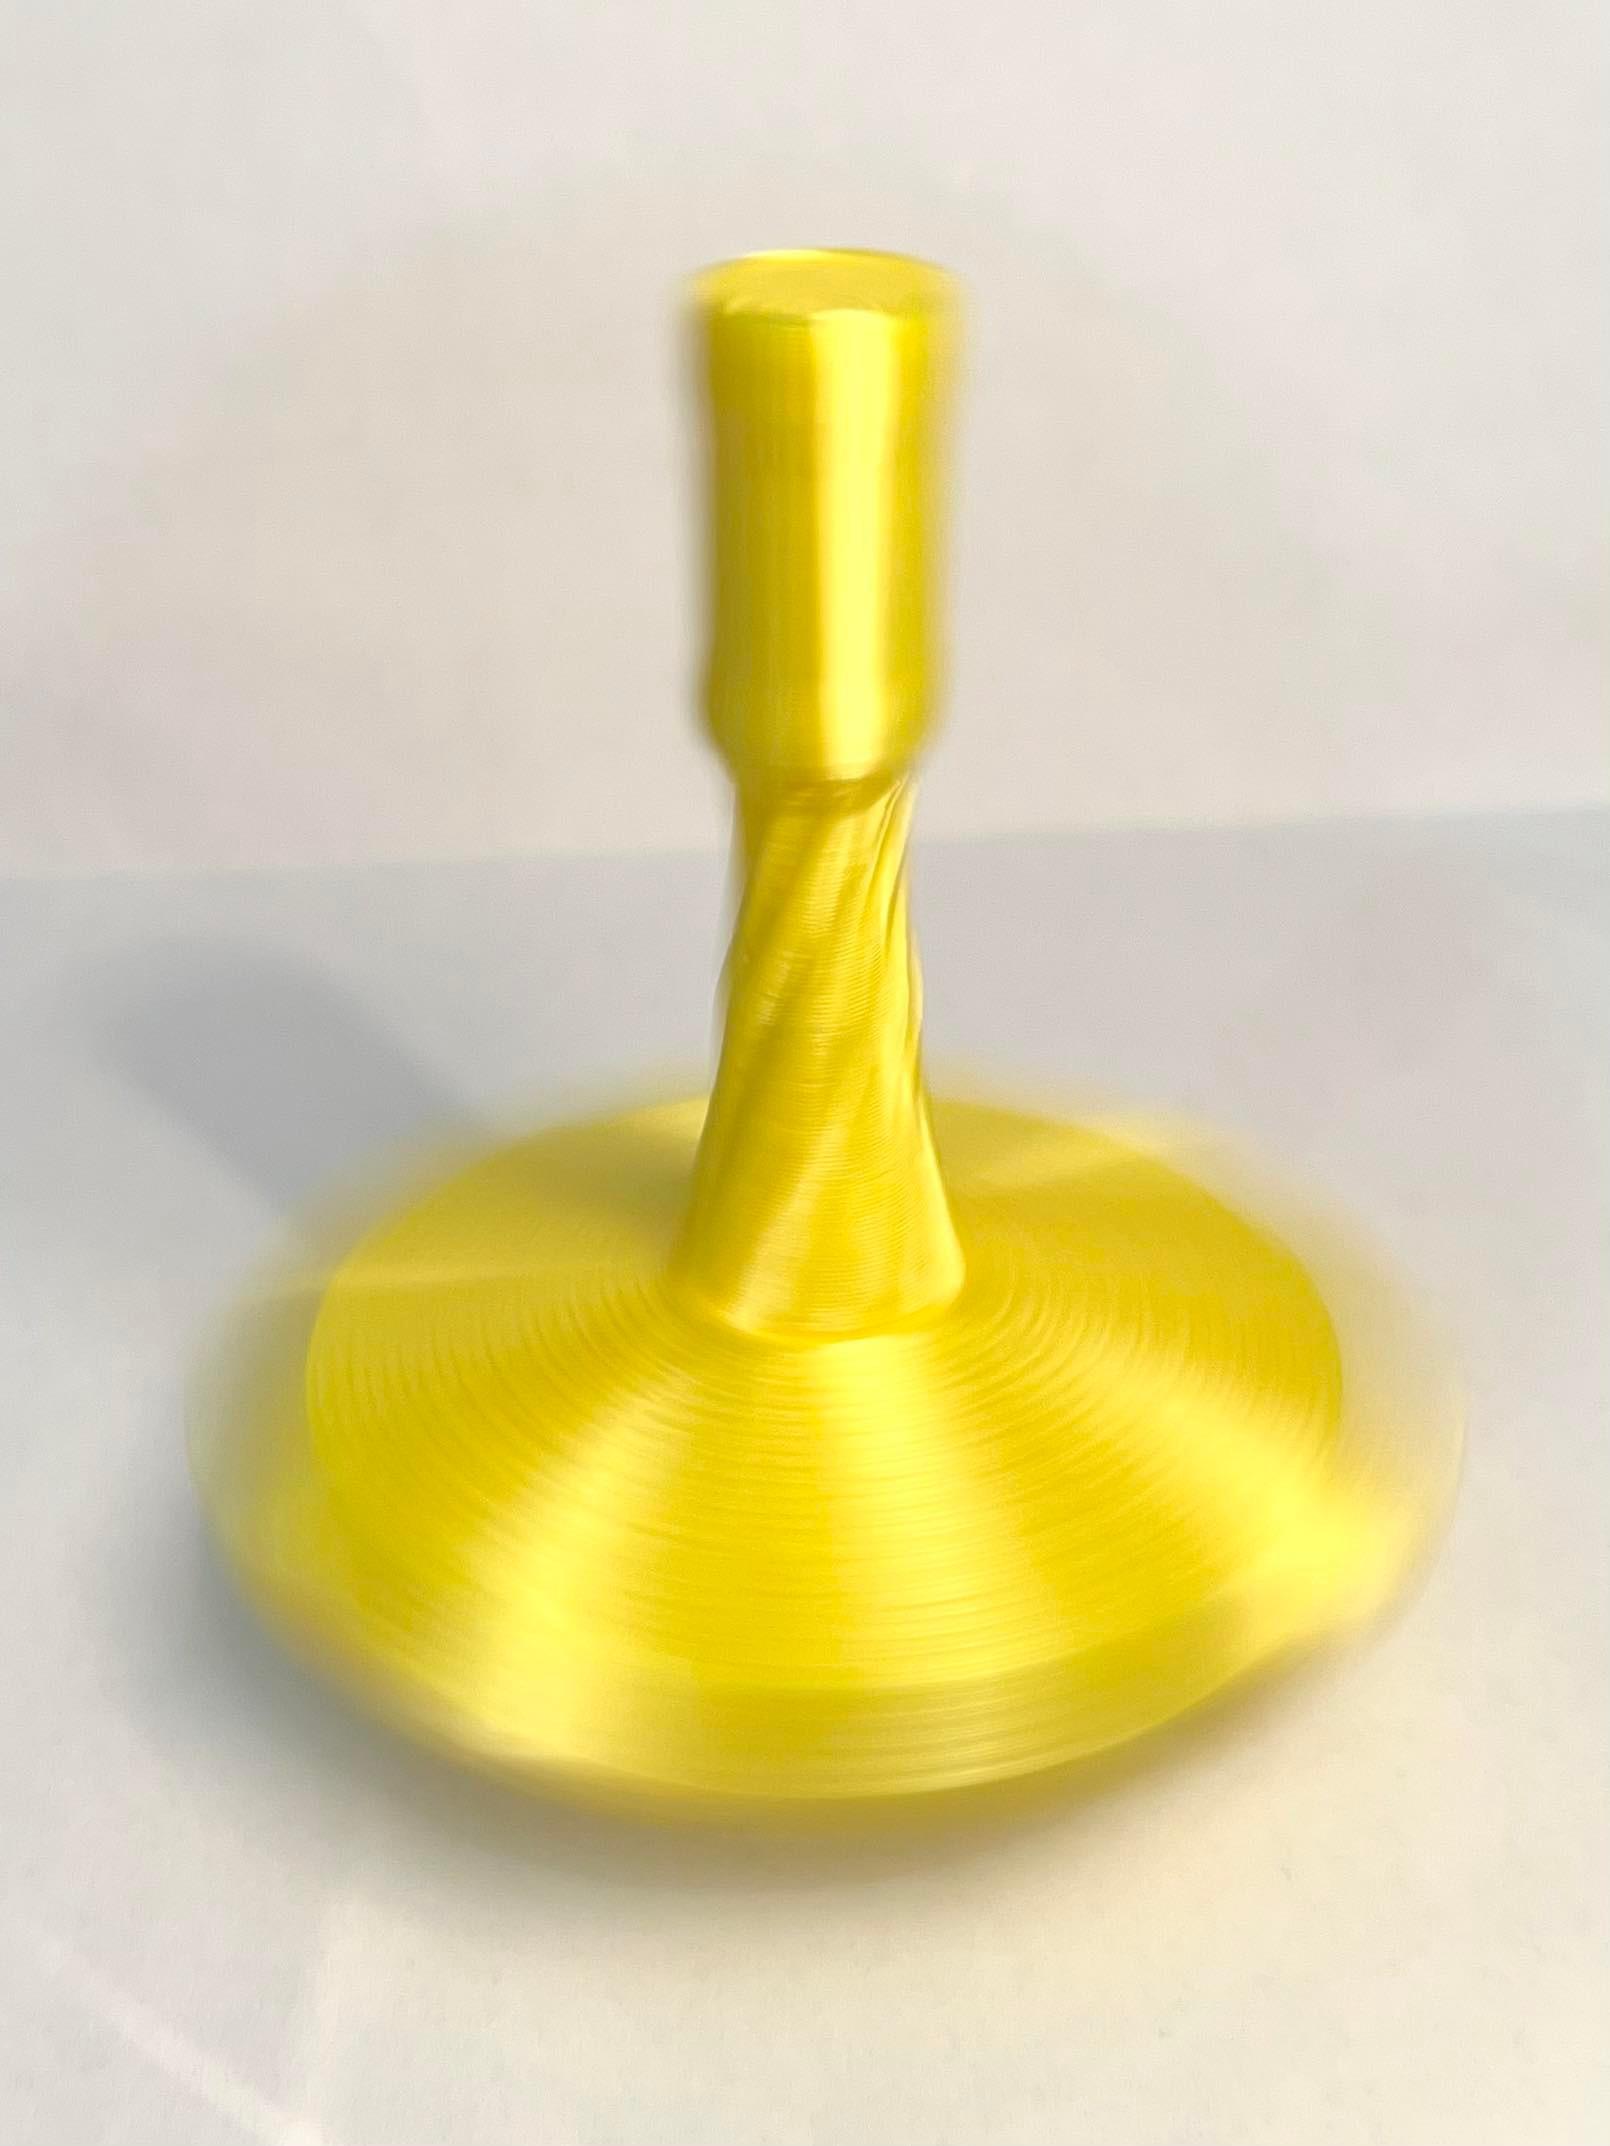 Spin Top Toy 3d model